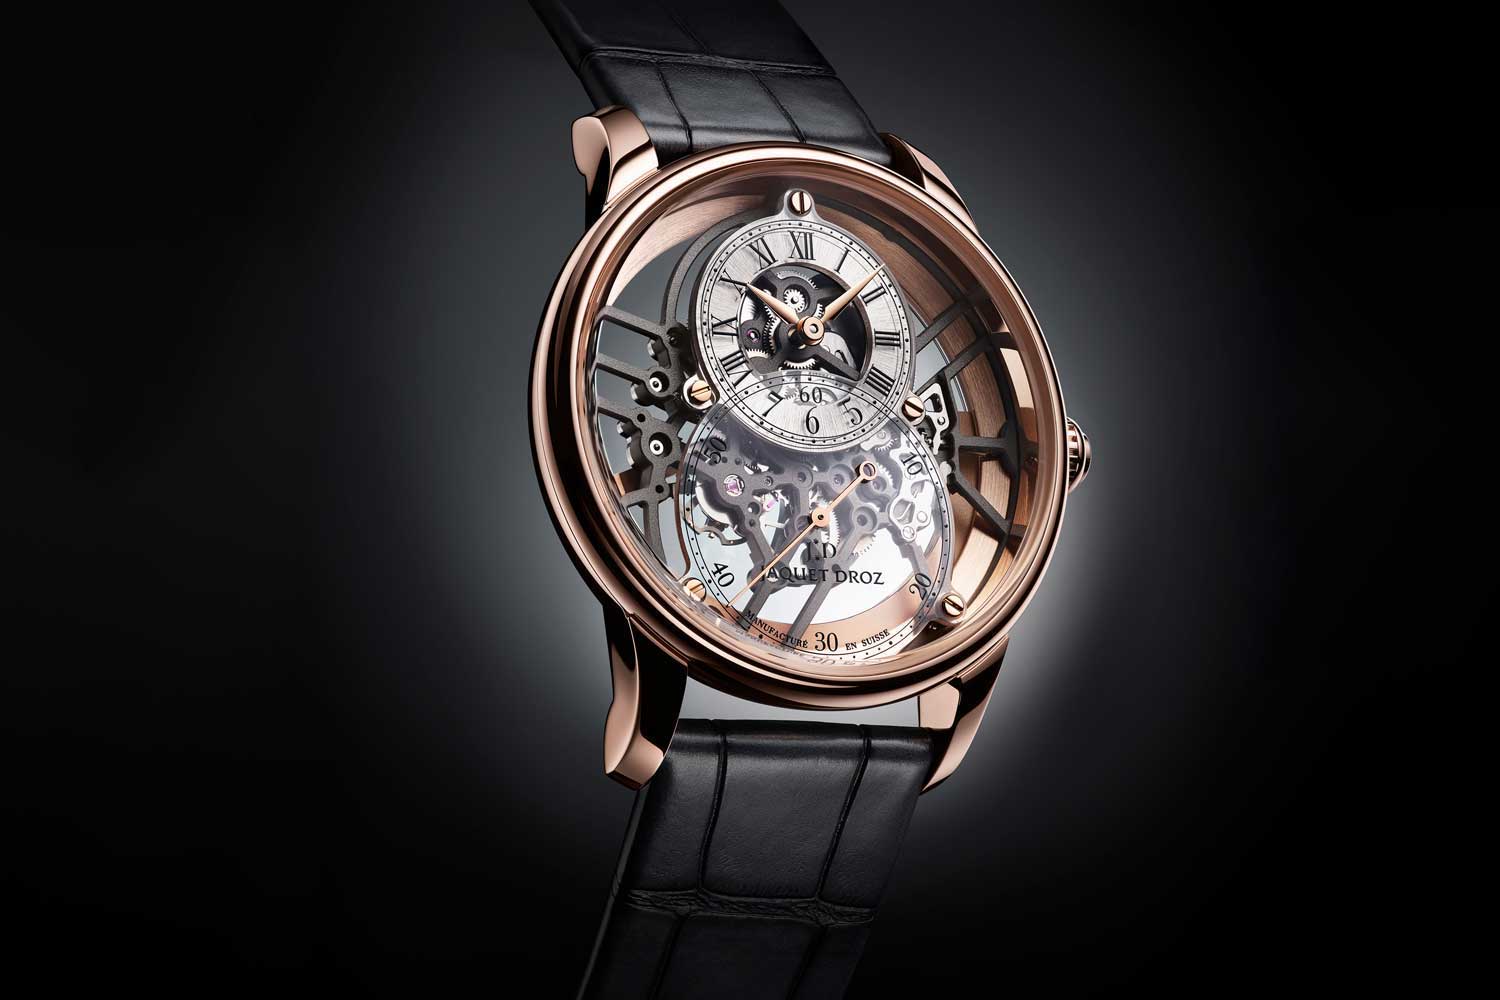 Jaquet Droz introduced the Skelet-One in 2018, a skeletonised and modernised edition of the Grande Seconde.